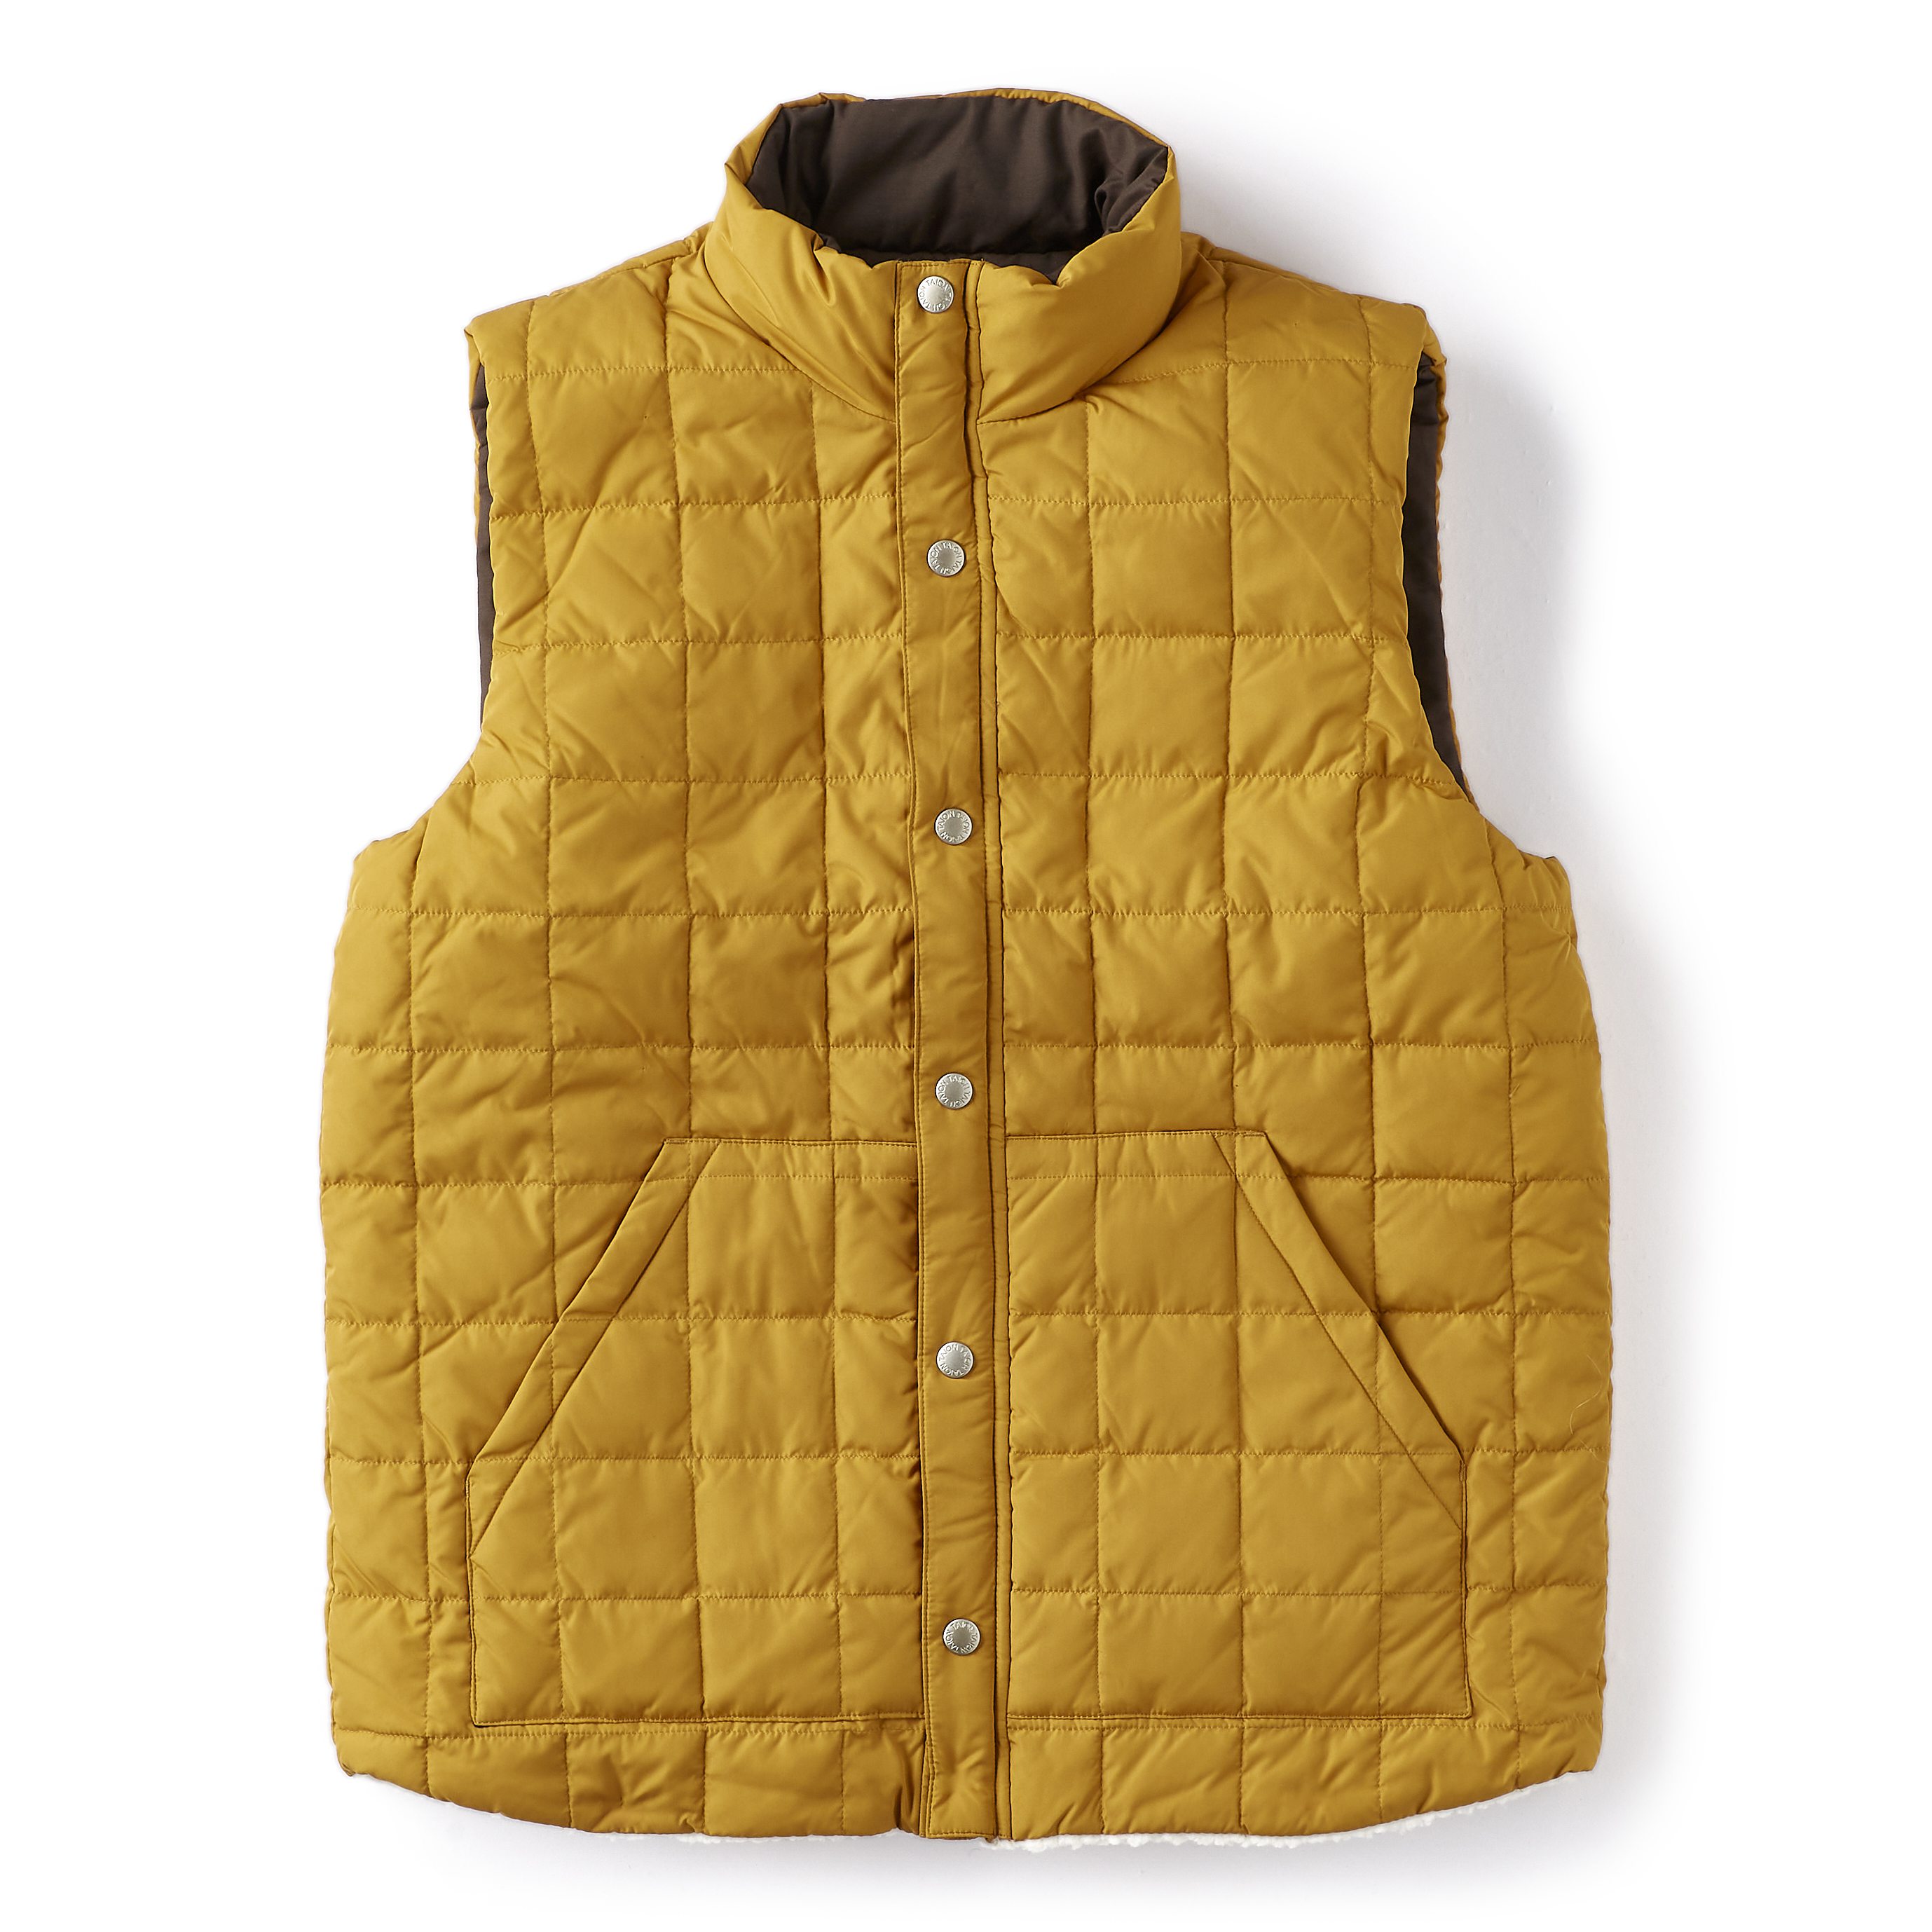 Military Reversible Insulated Down Vest in Camel/Dark Chocolate